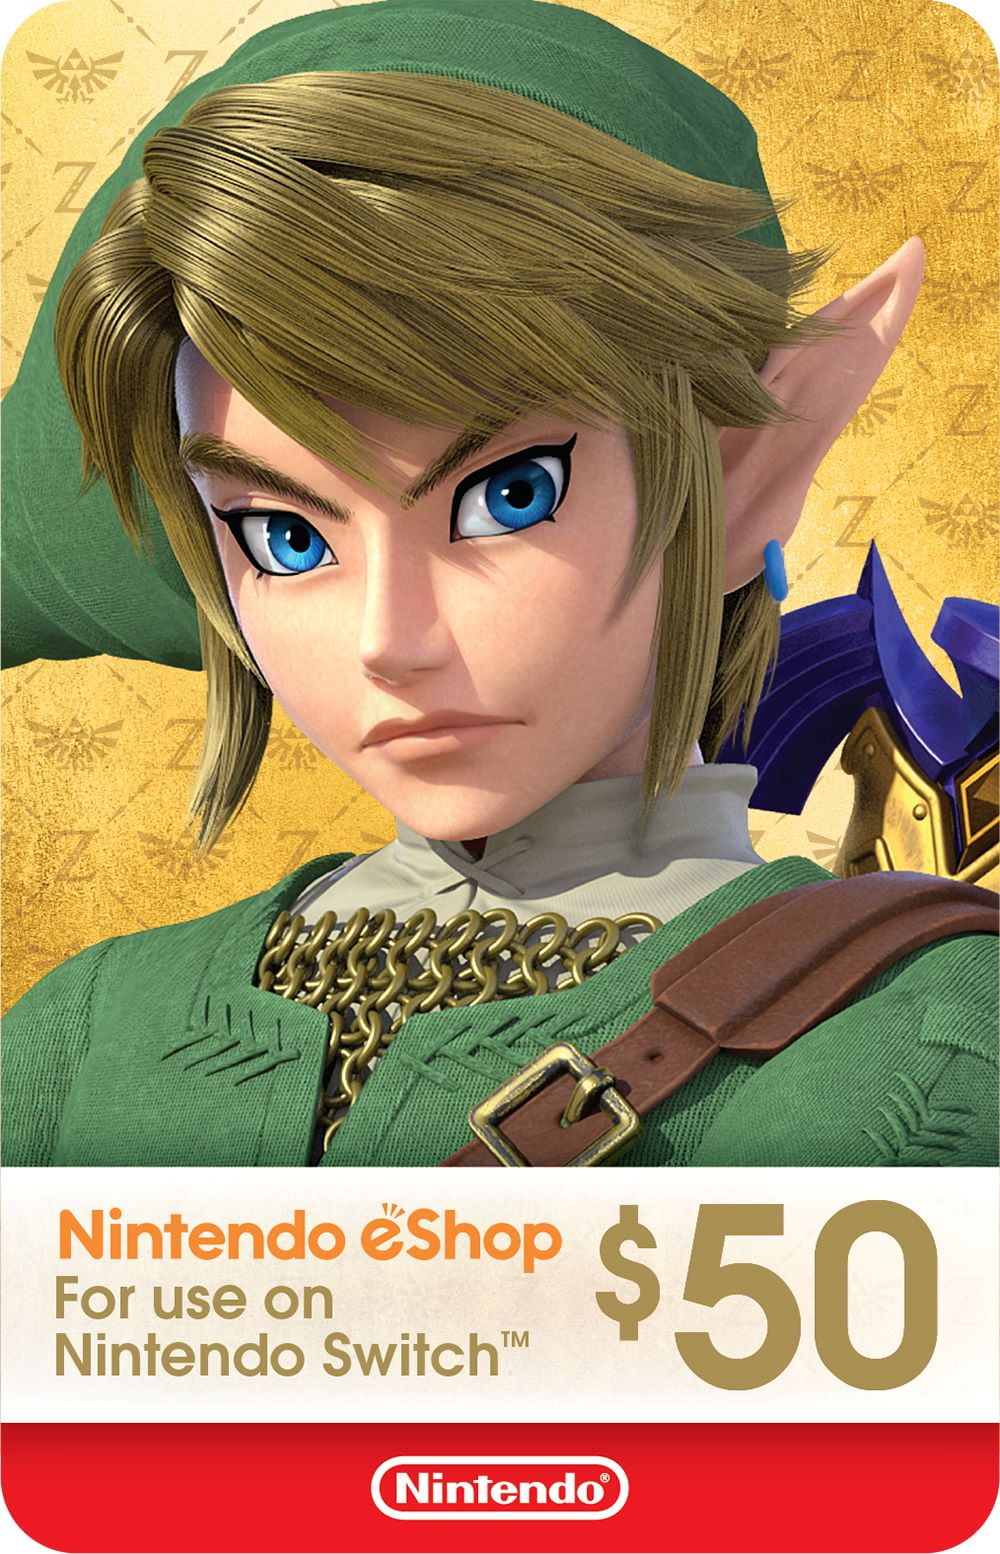 Nintendo eShop Gift Cards are $10 Off at Costco Right Now - IGN